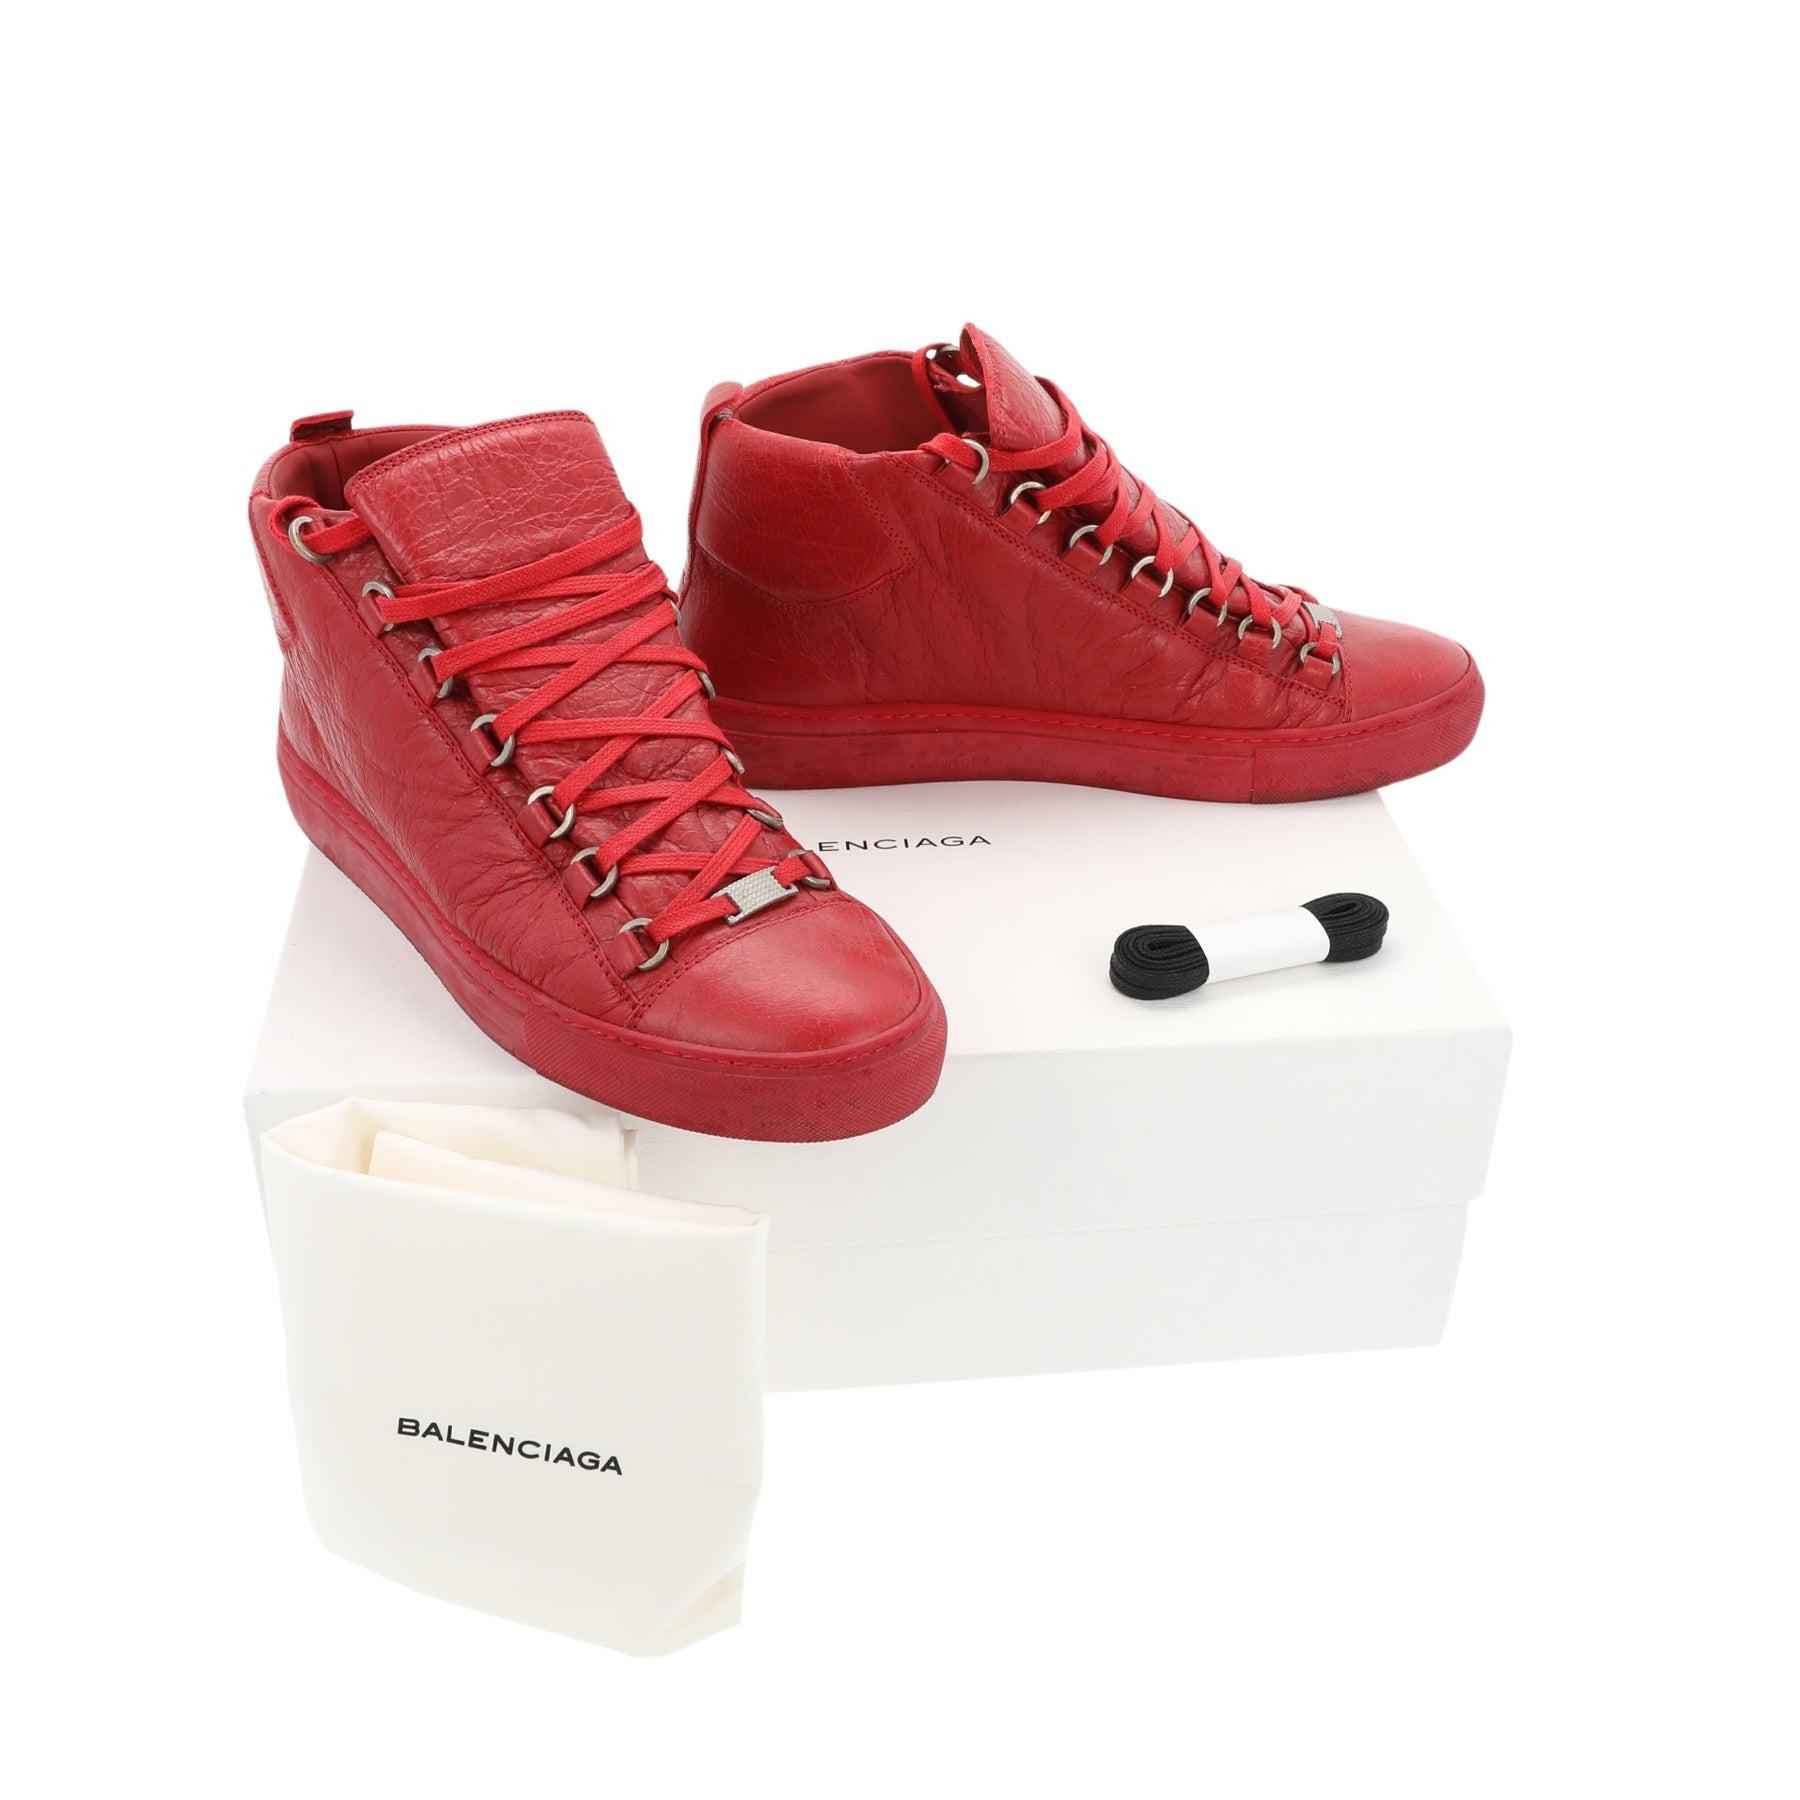 Balenciaga Arena Leather High Sz 43 10 Thick Sole Sneaker Shoe MSRP 545  Classic  eBay